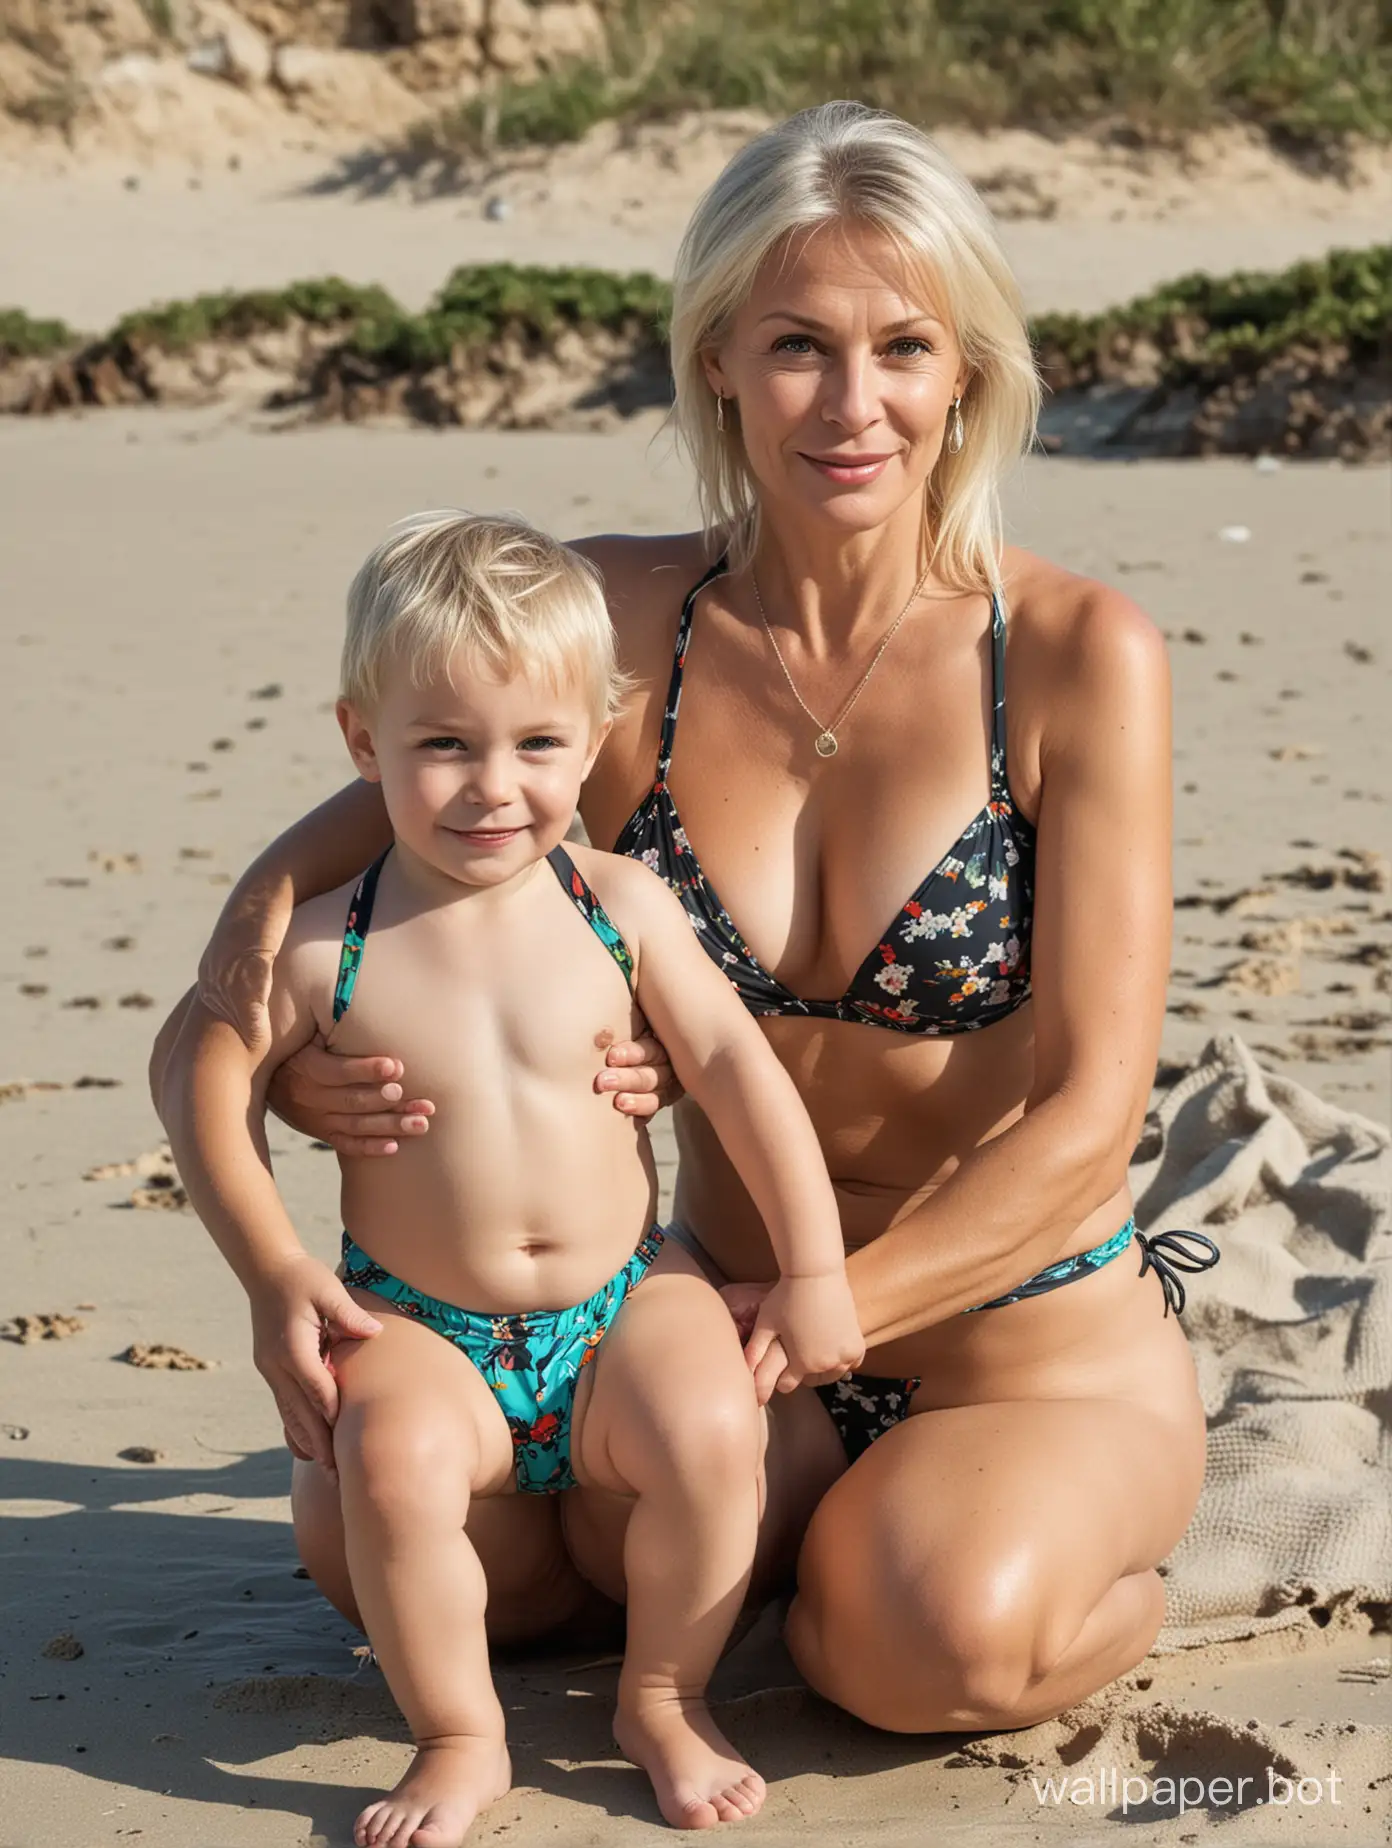 Blond-Russian-Mother-and-Son-Relaxing-on-Beach-in-Thong-Bikinis